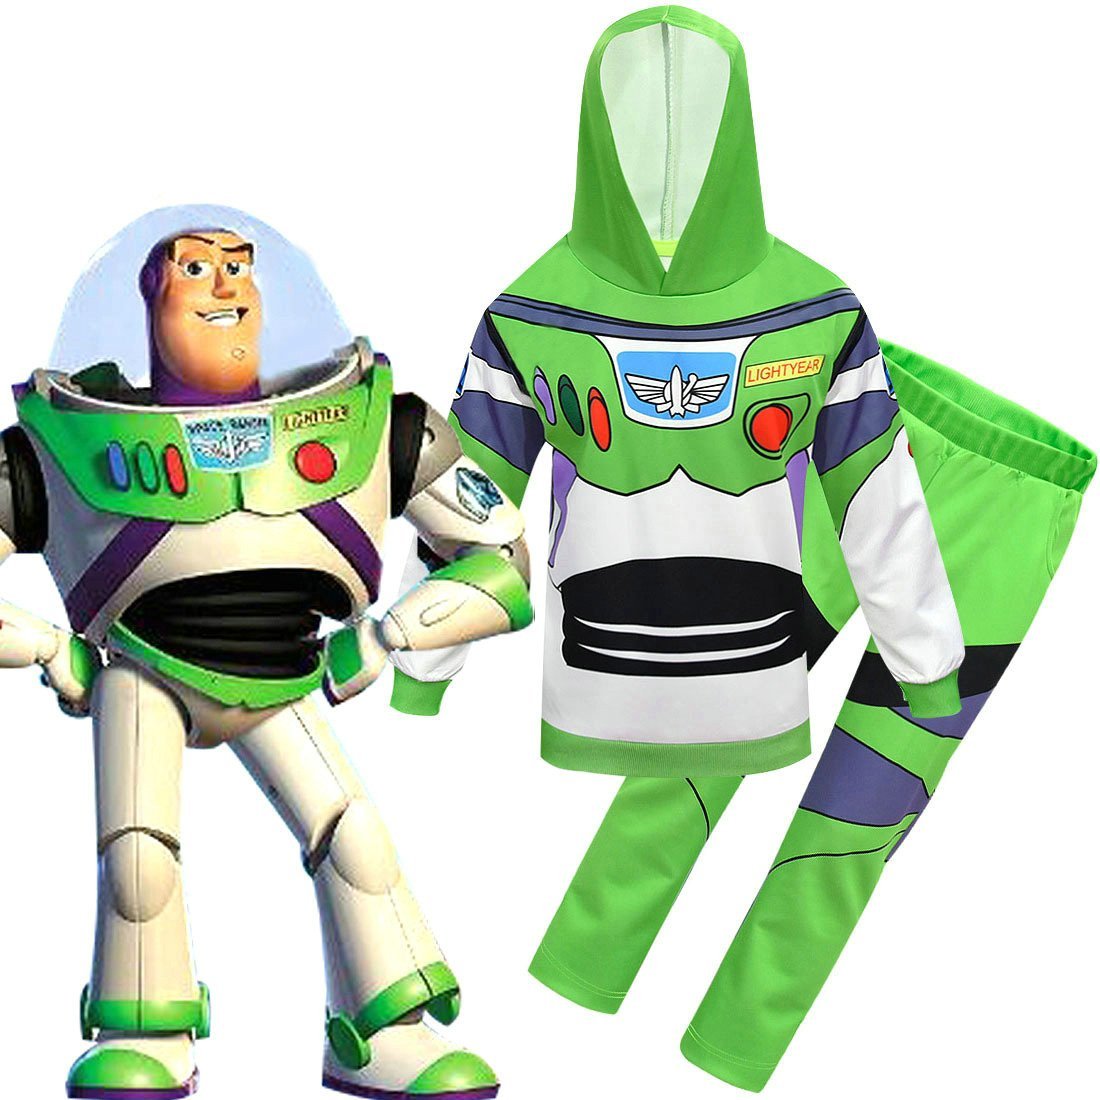 Toy Story 4 Buzz Lightyear Cosplay Costume Sets for Kids